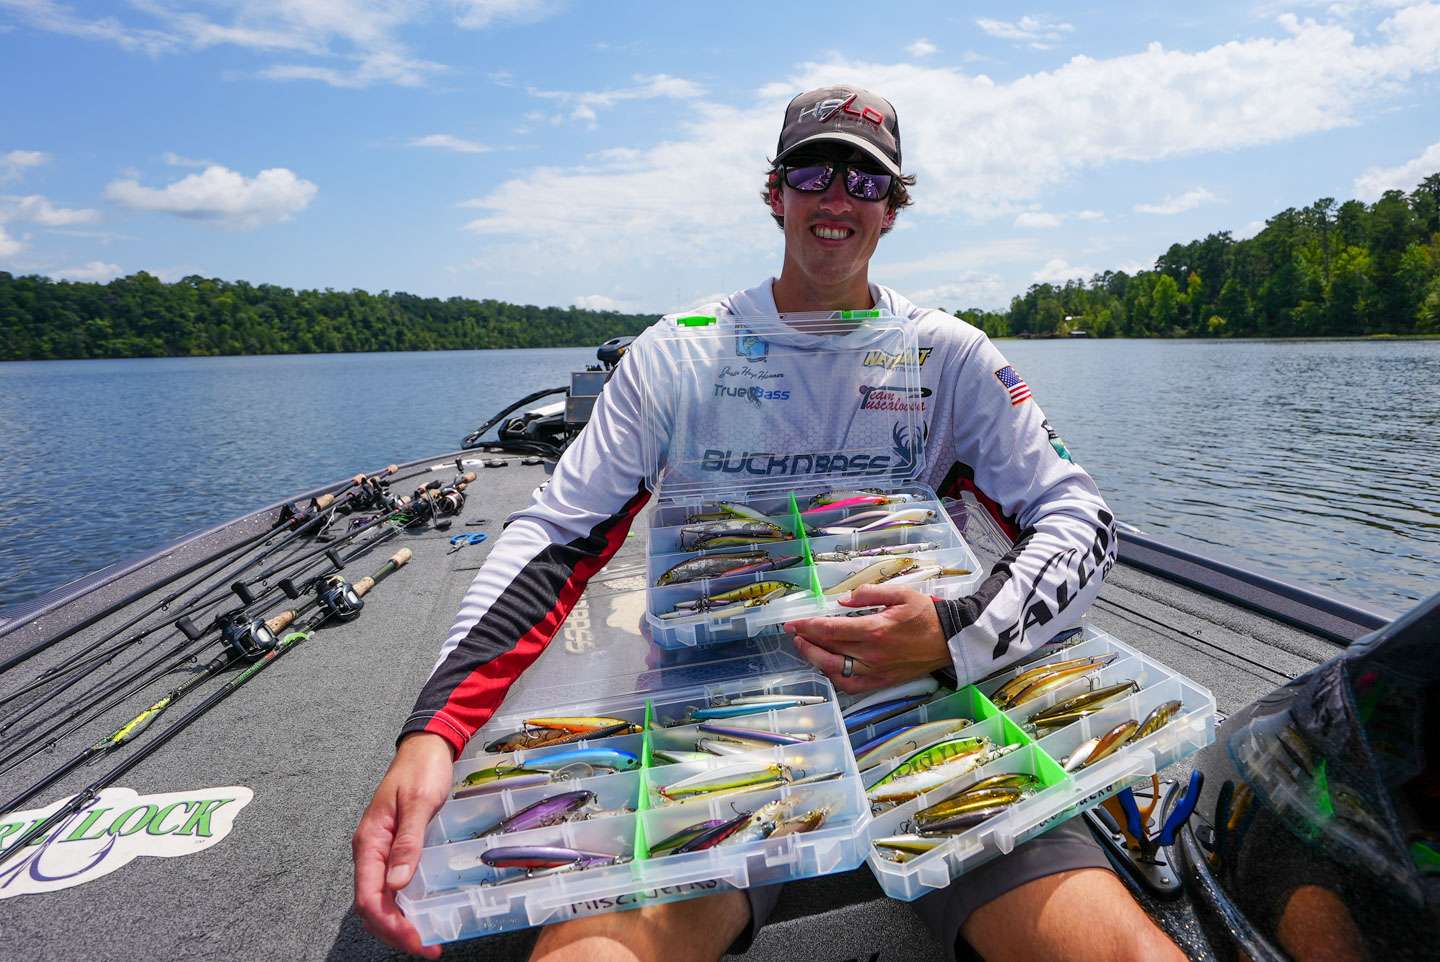 The Classic qualifier keeps three boxes of jerkbaits in his boat at all times. Yes, three boxes containing roughly 120 different jerkbaits. 